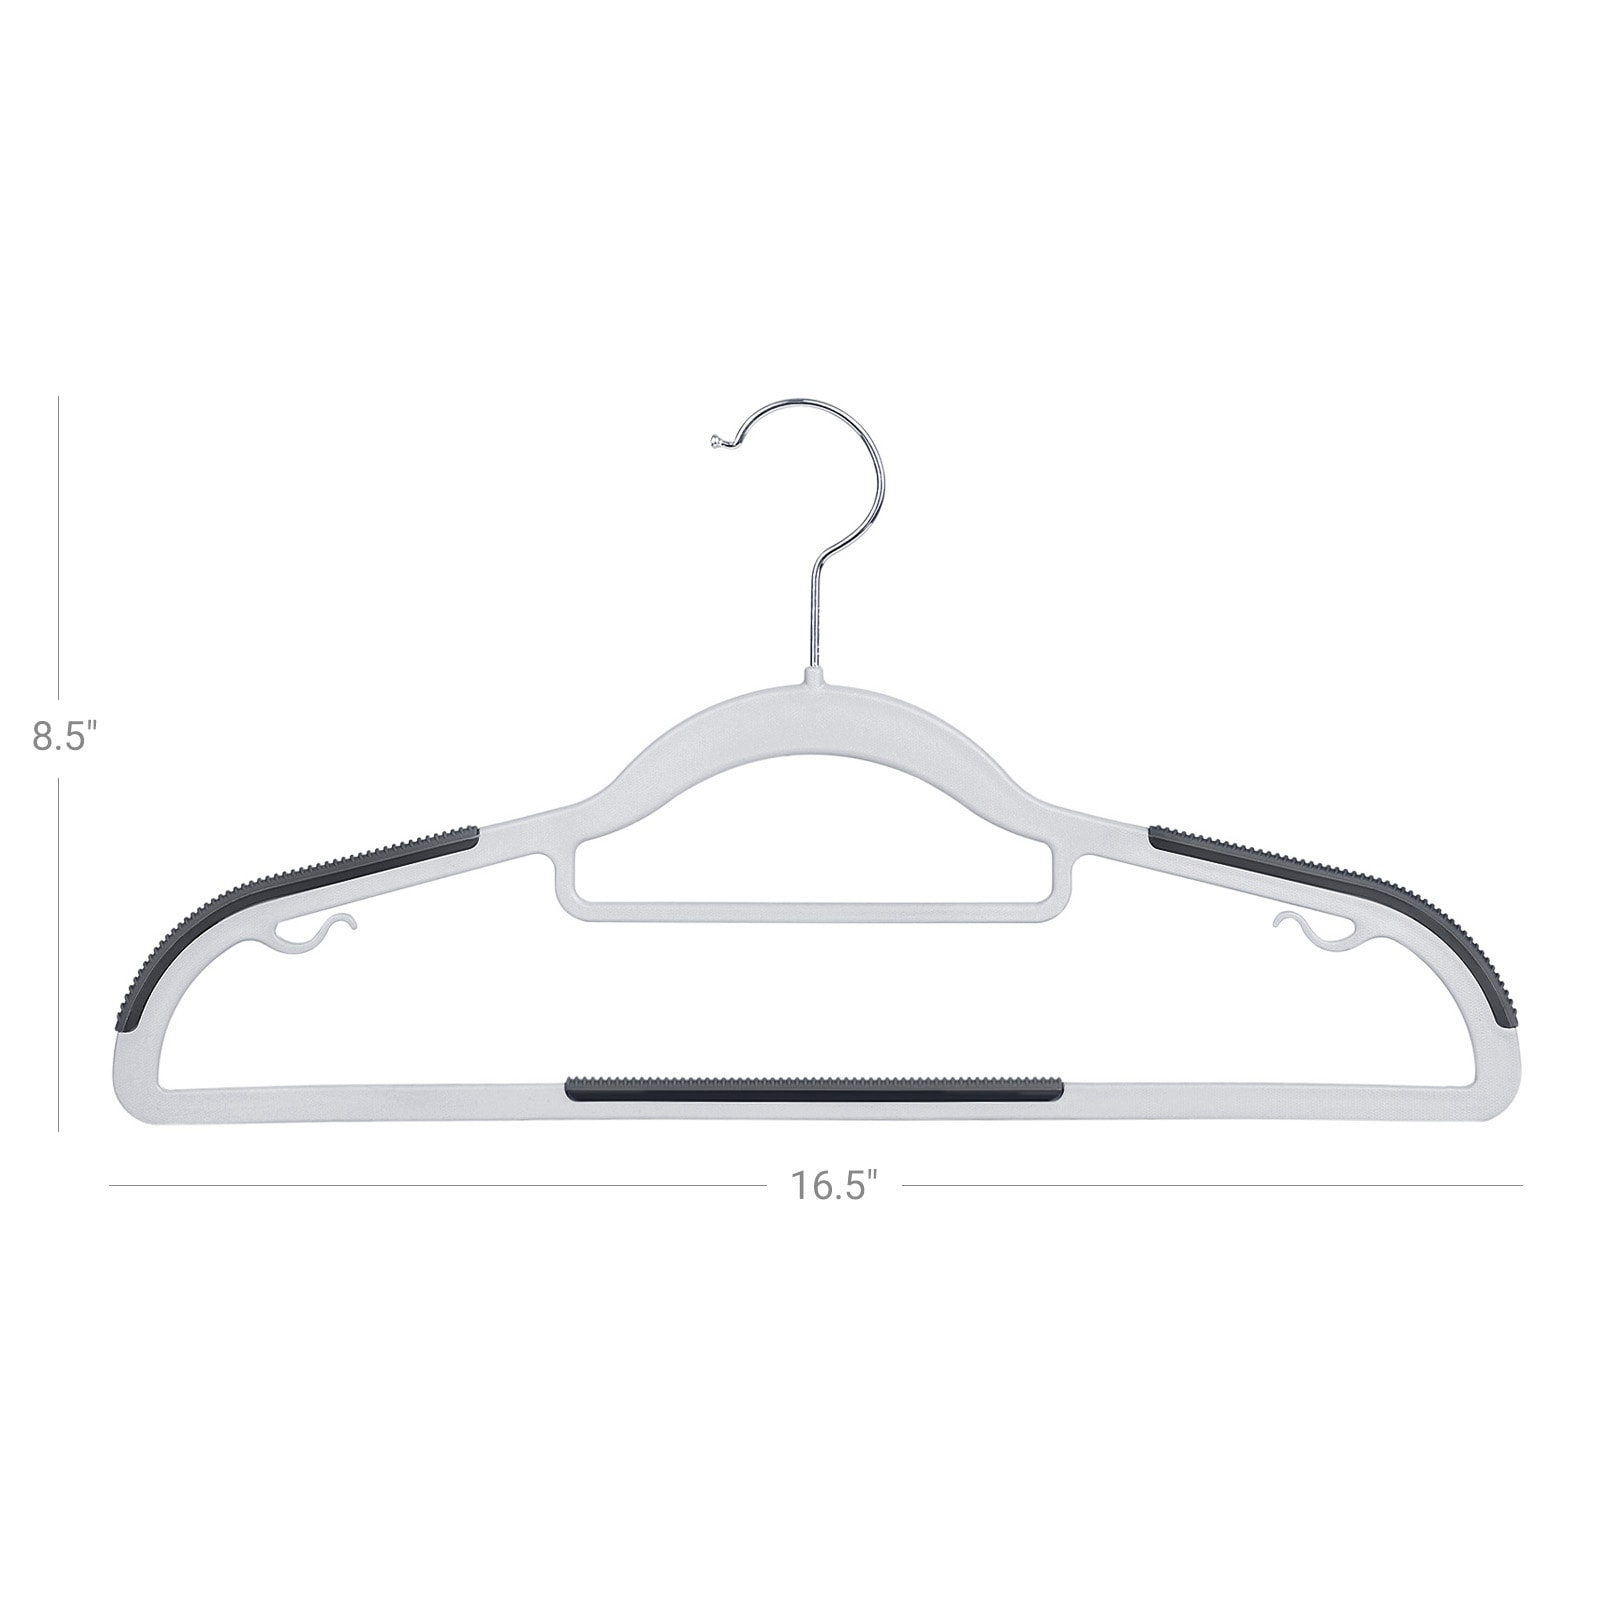 https://ak1.ostkcdn.com/images/products/is/images/direct/5afffc7ce4daf2dbe87fbeaa0136194b4b4843f5/SONGMICS-Pack-of-50-Coat-Hangers%2C-Heavy-Duty-Plastic-Hangers-with-Non-Slip-Design%2C-Space-Saving-Clothes-Hangers.jpg